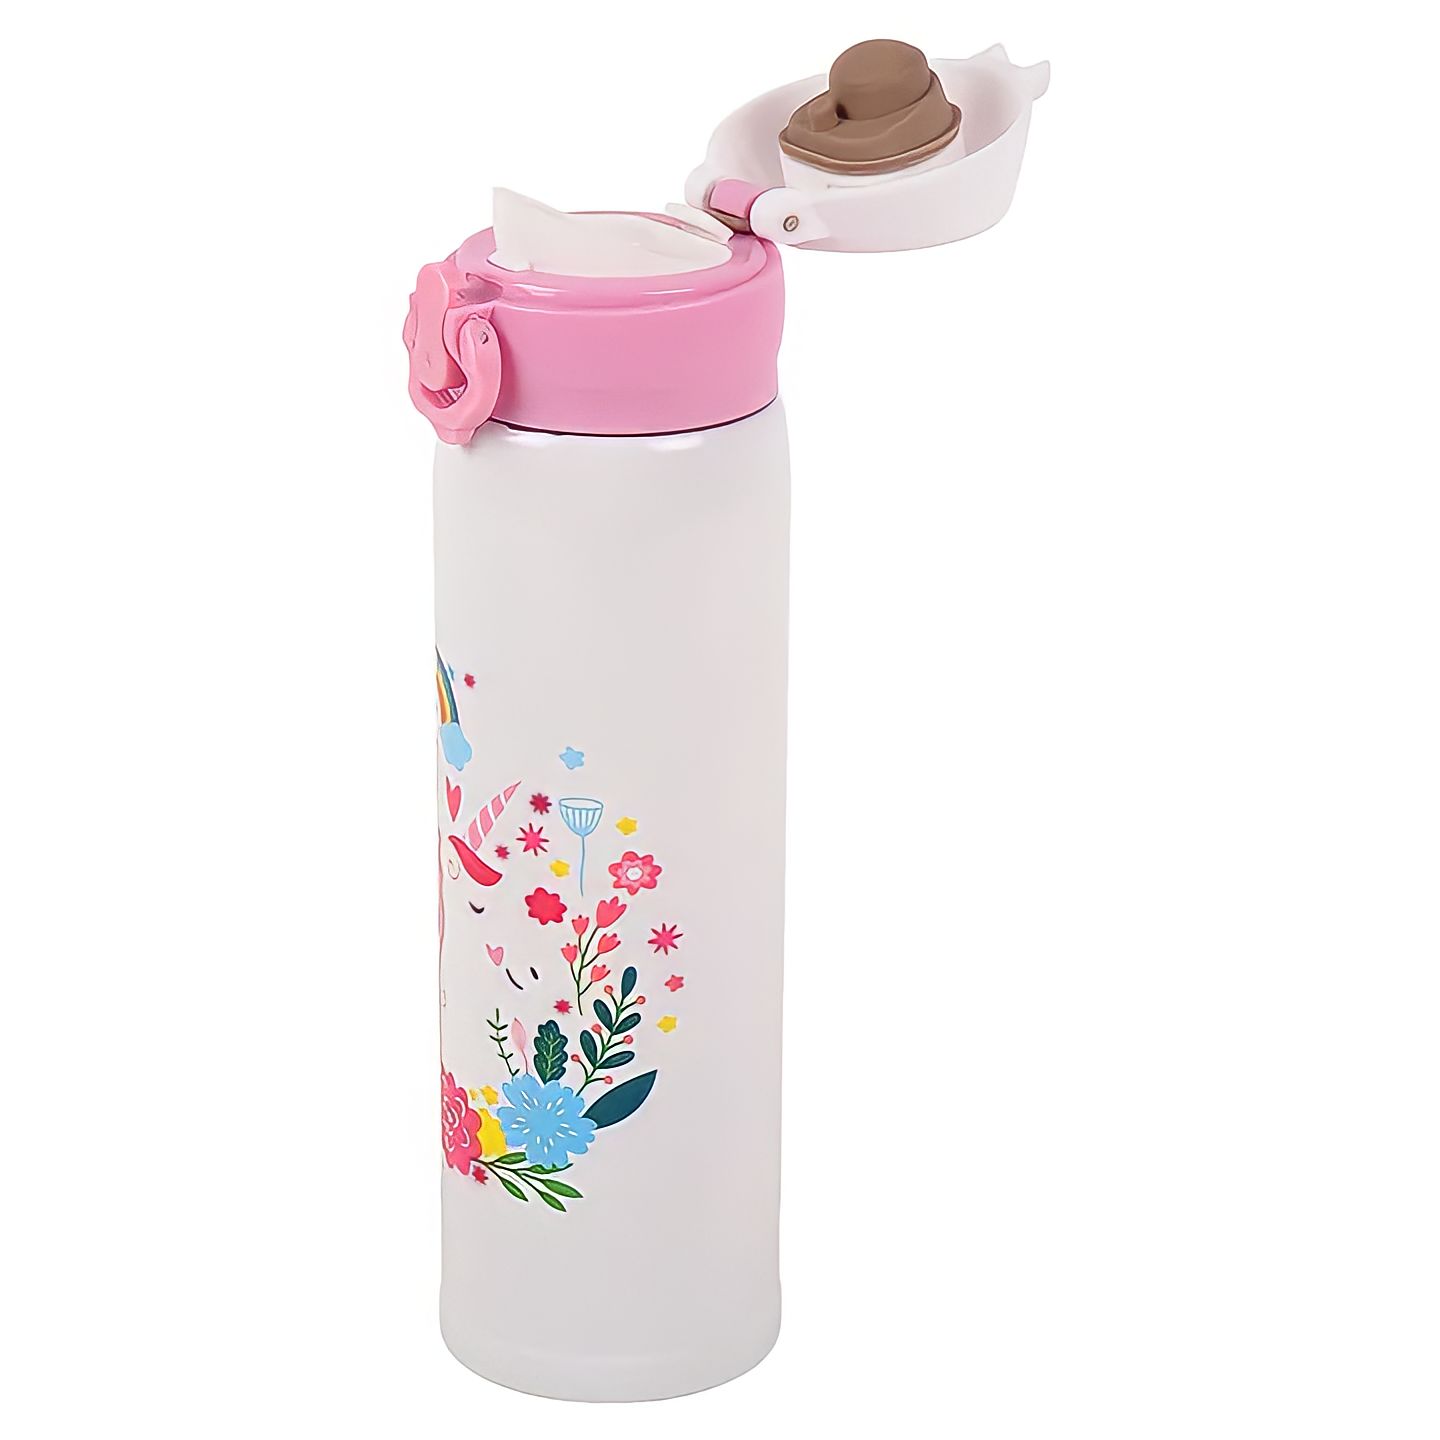 Stainless Steel Cartoon Cute Unicorn Water Bottle for Kids Hot and Cold  Water Bottle 500ml - Blue Color - Fingo Brain